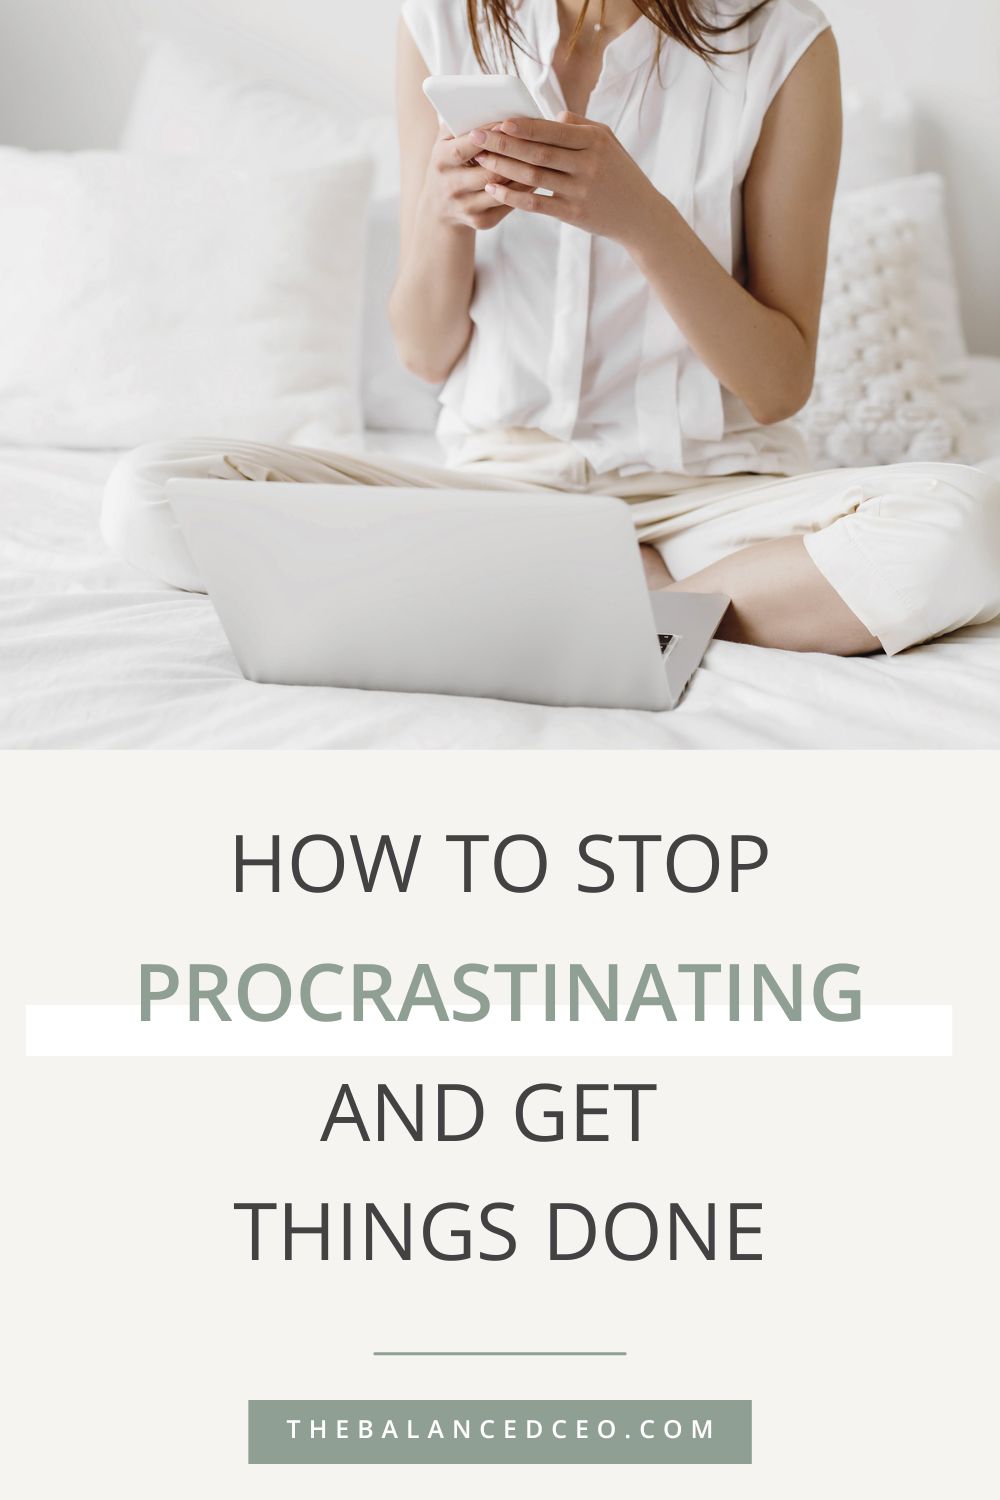 How to Stop Procrastinating and Get Things Done